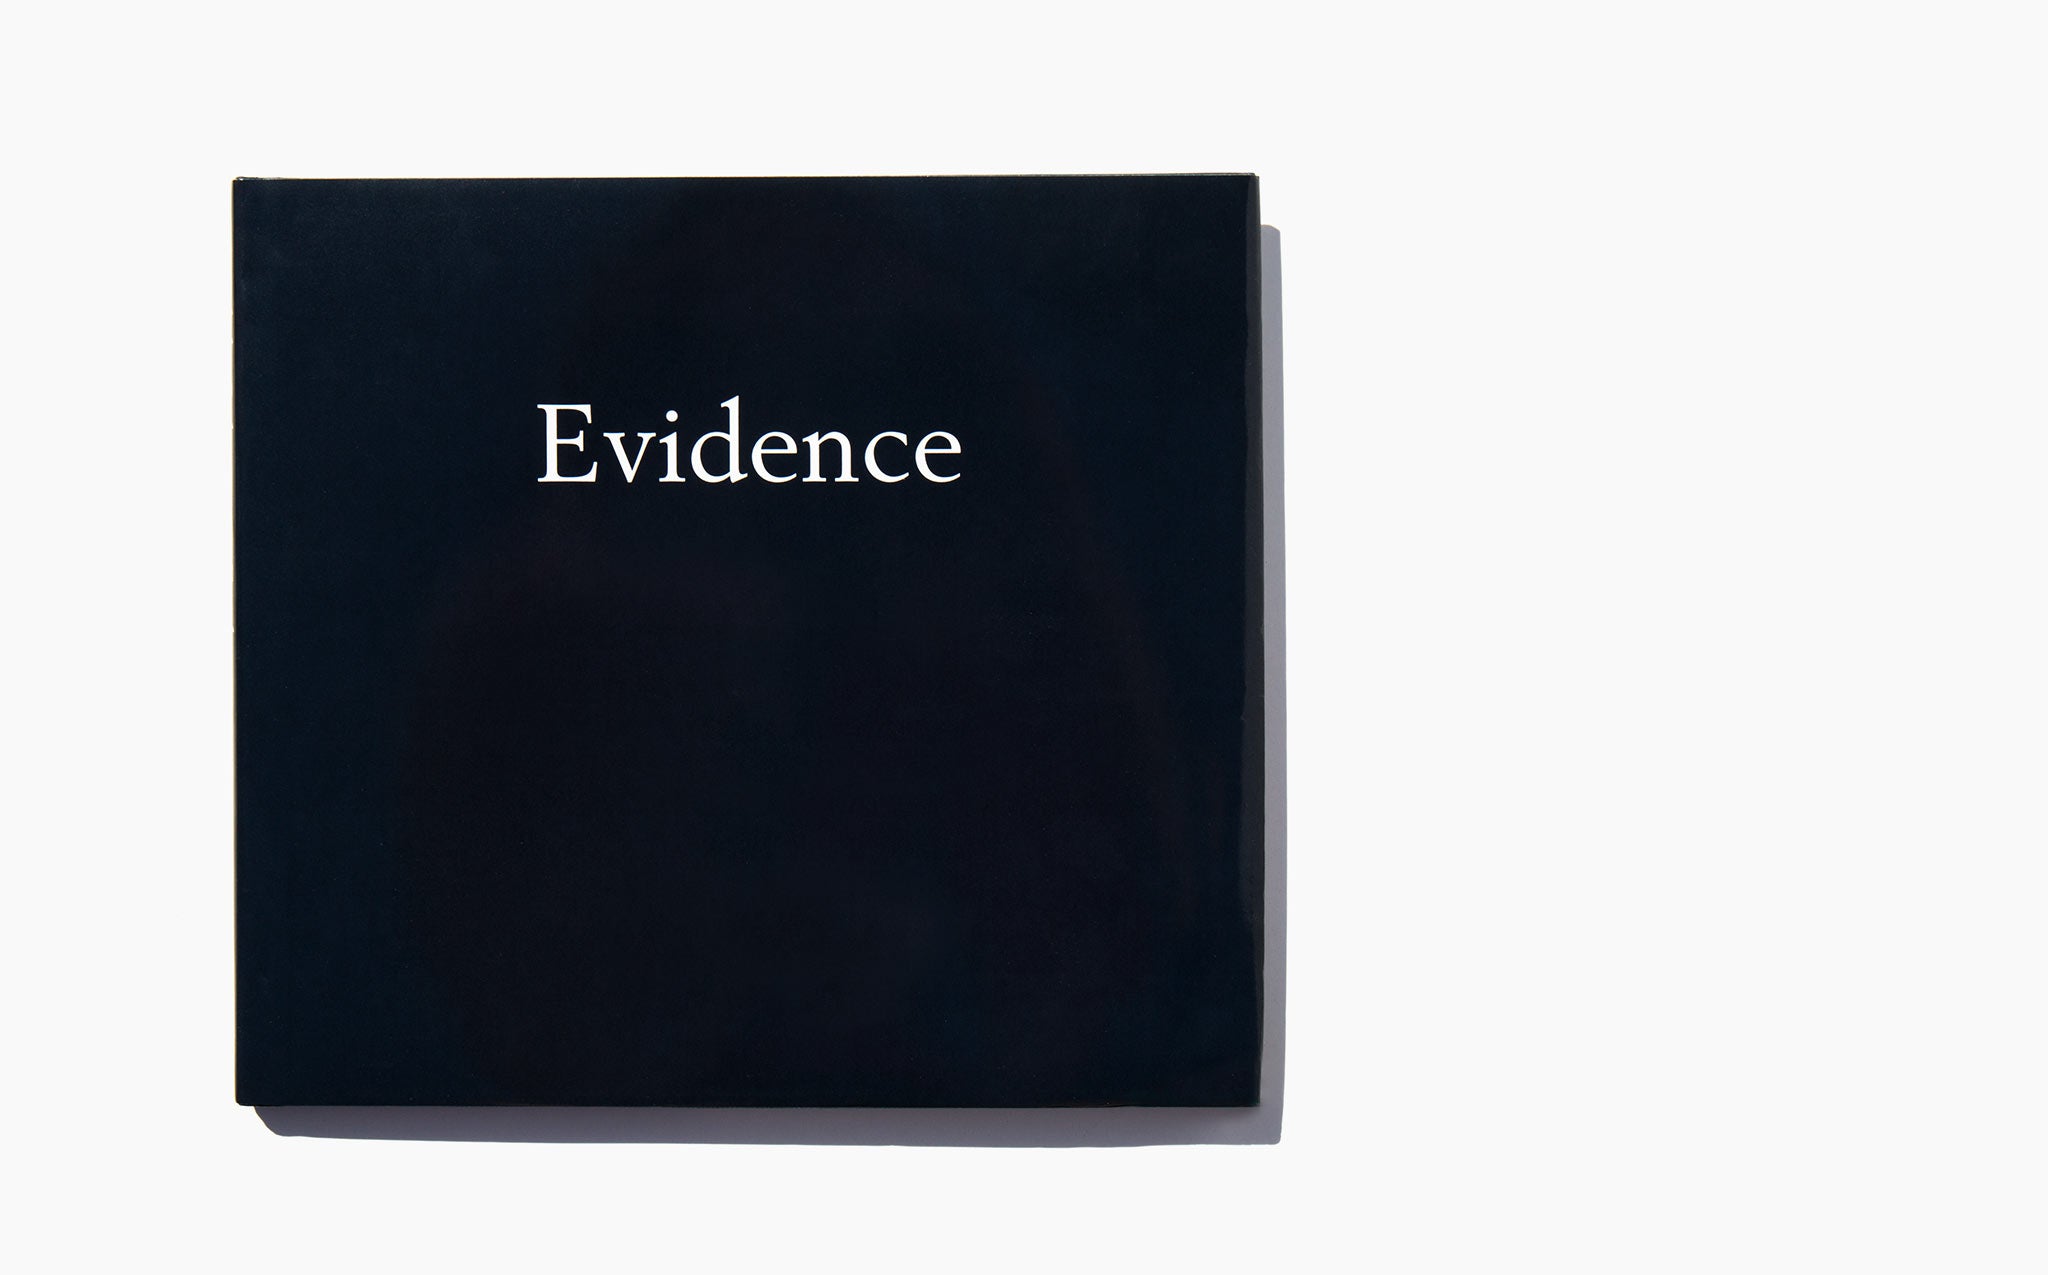 Evidence - Larry Sultan and Mike Mandel